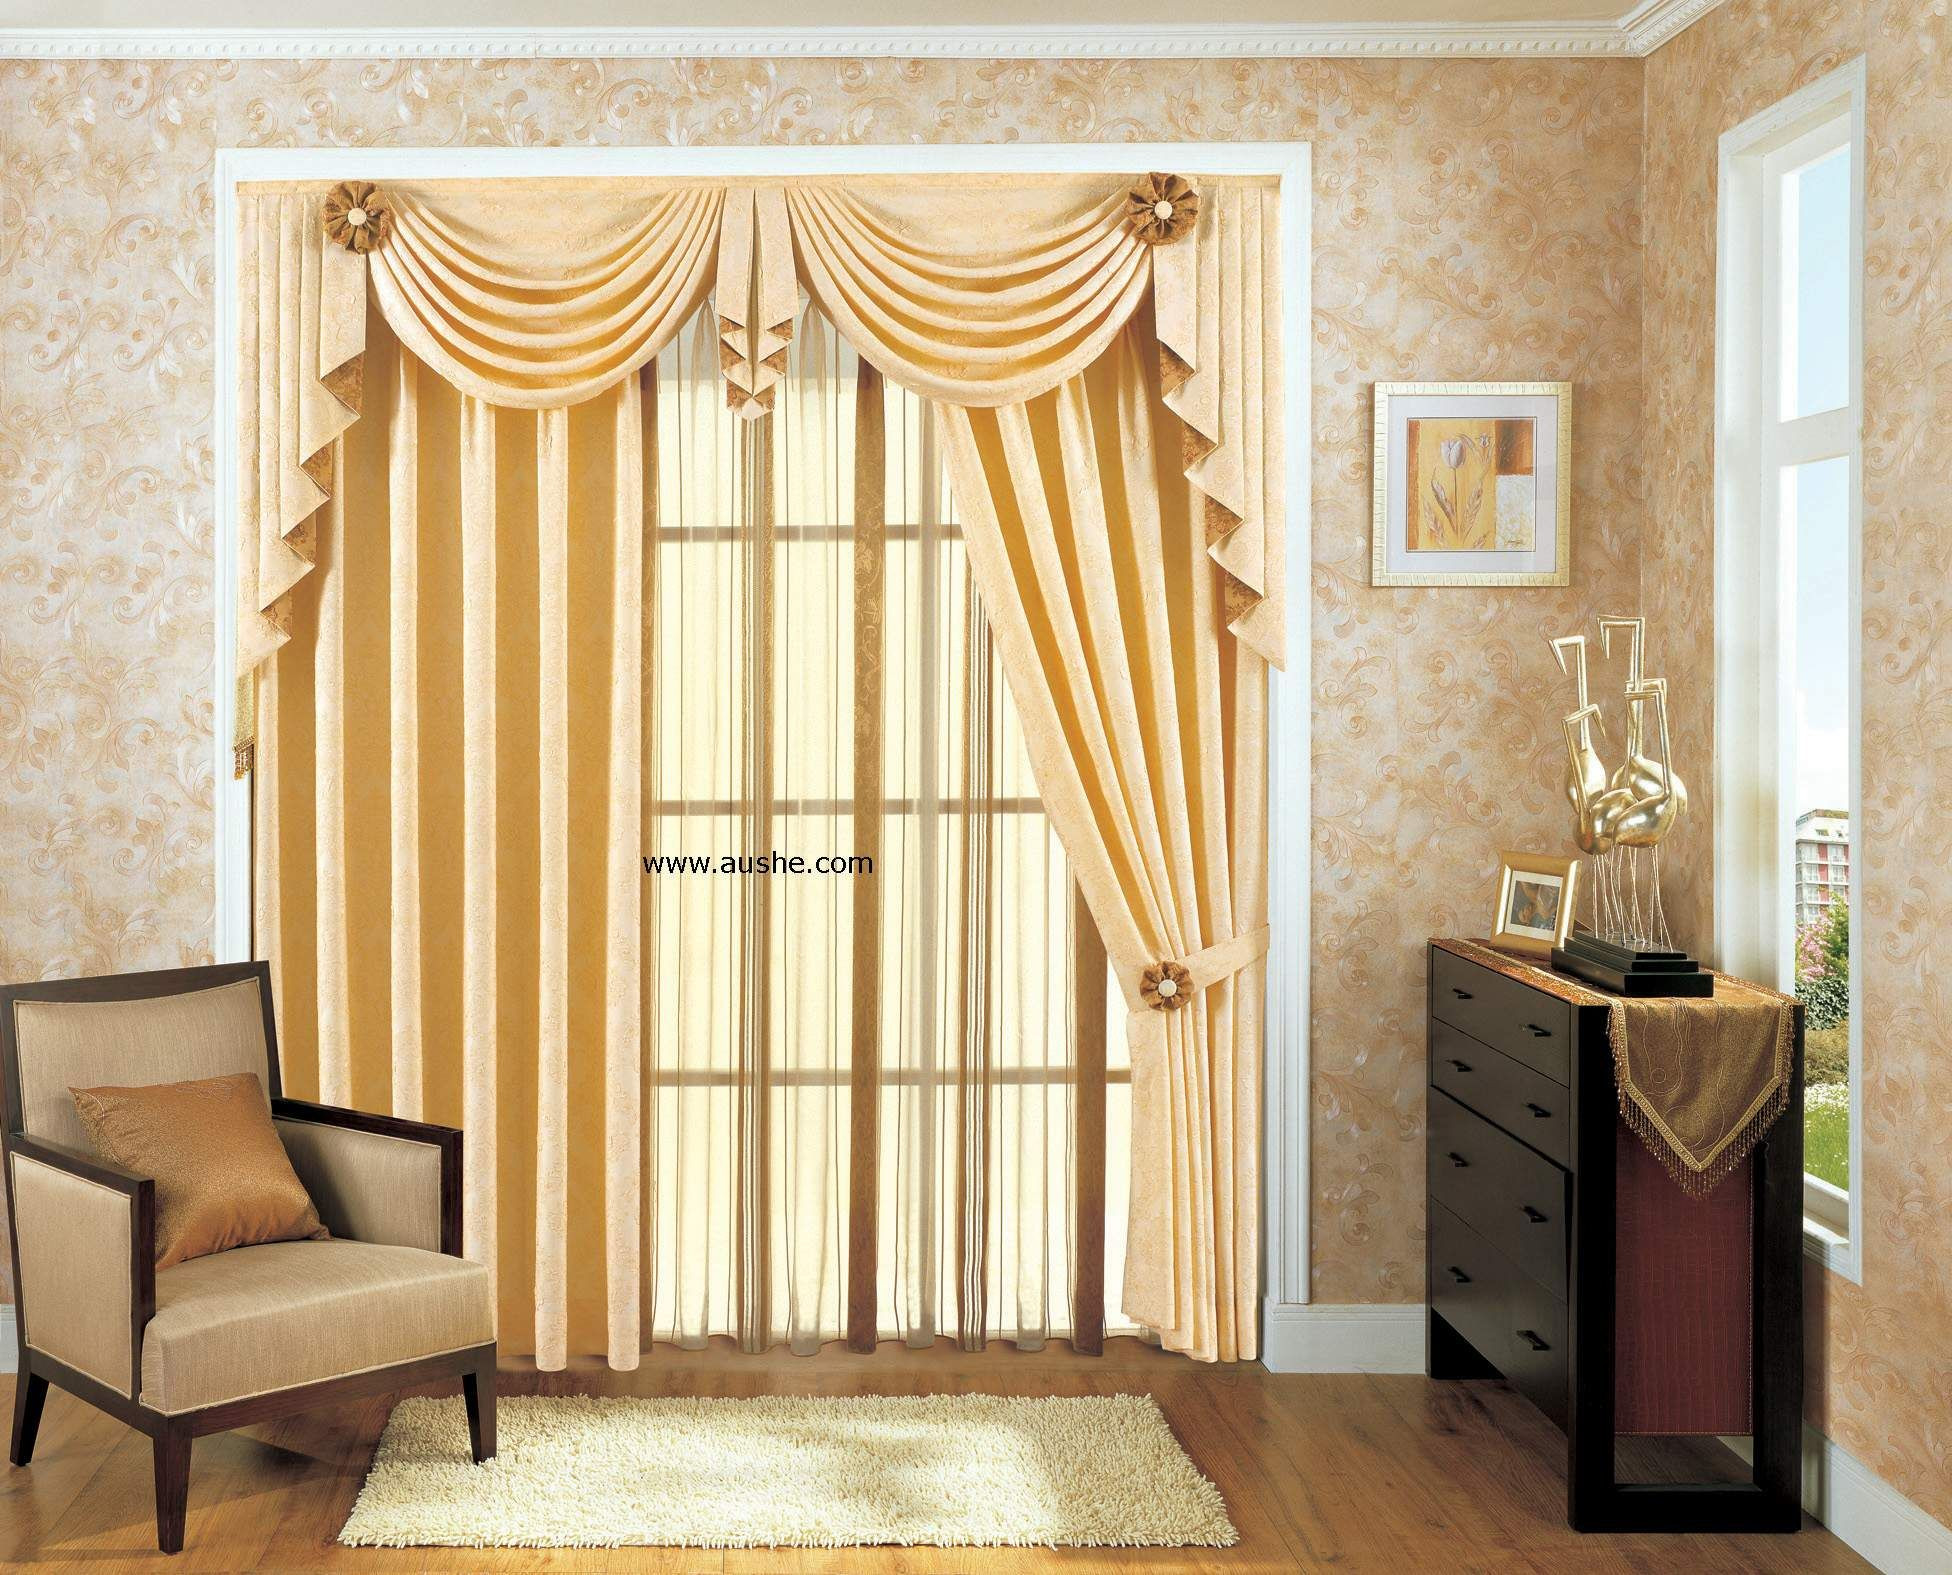 Living Room Curtains With Valances
 Matching Wallpaper And Curtains For Living Room Homebase